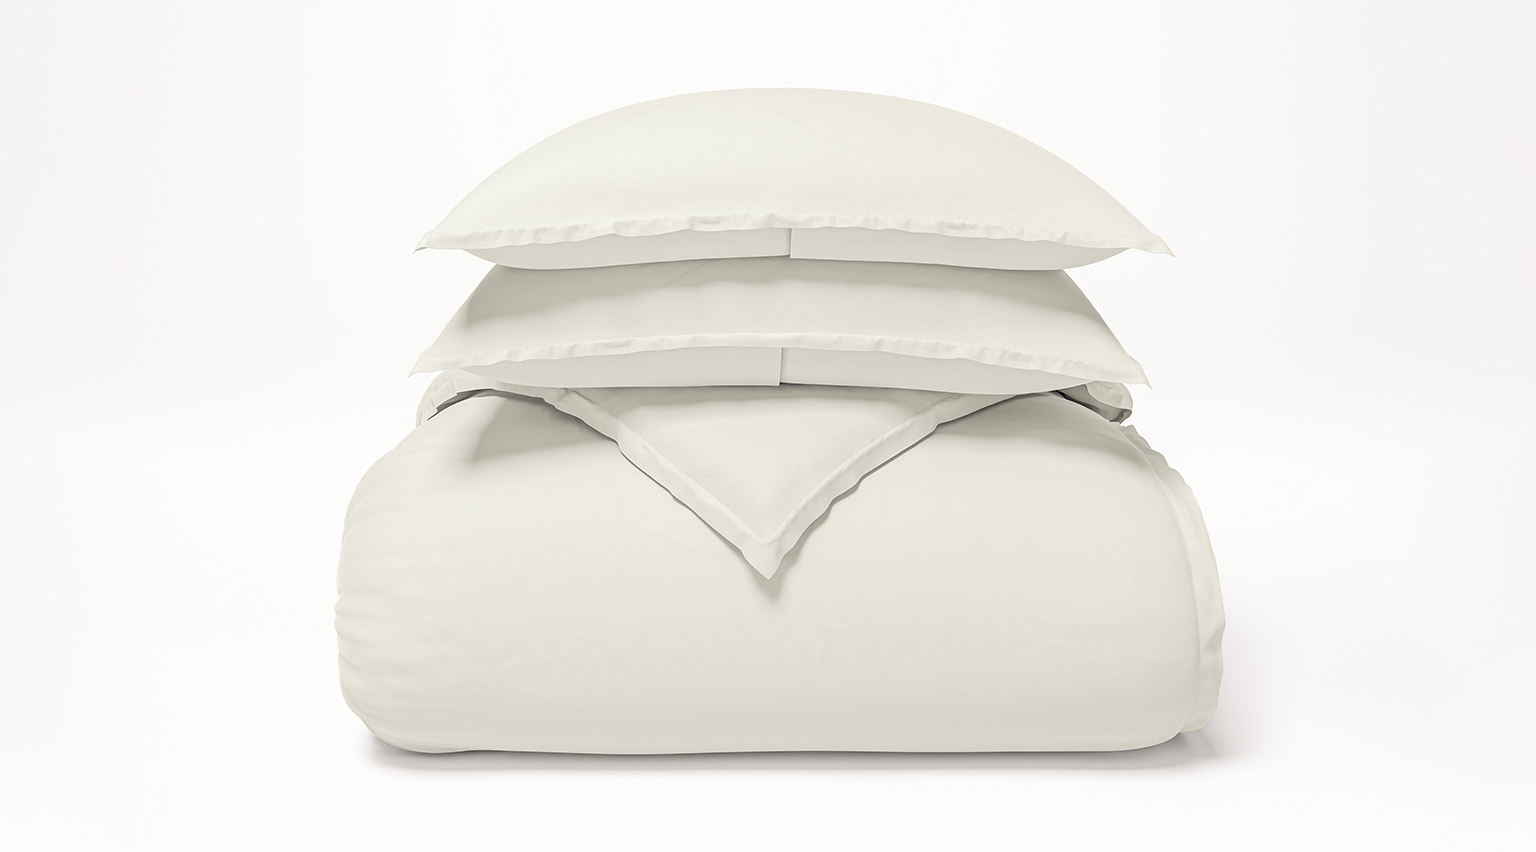 Organic Percale Duvet Cover Set Stacked View